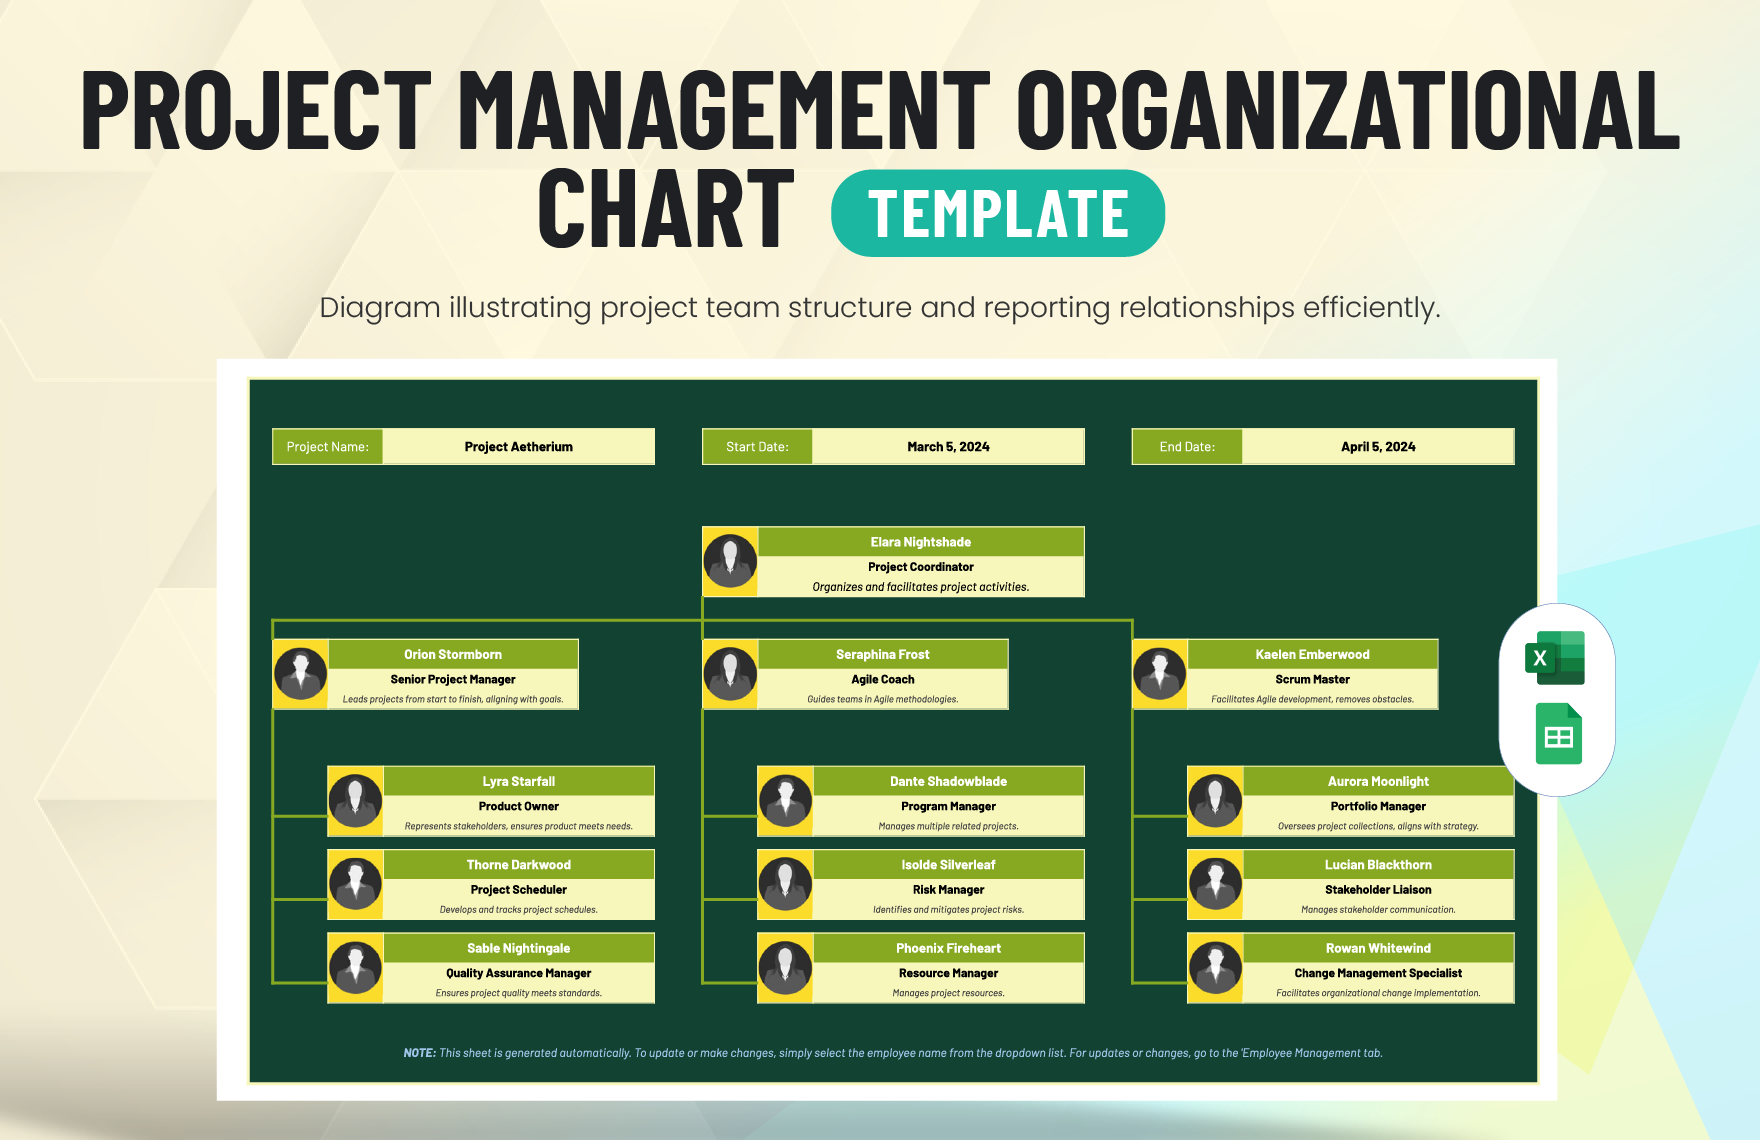 Project Management Organizational Chart Template in Excel, Google Sheets